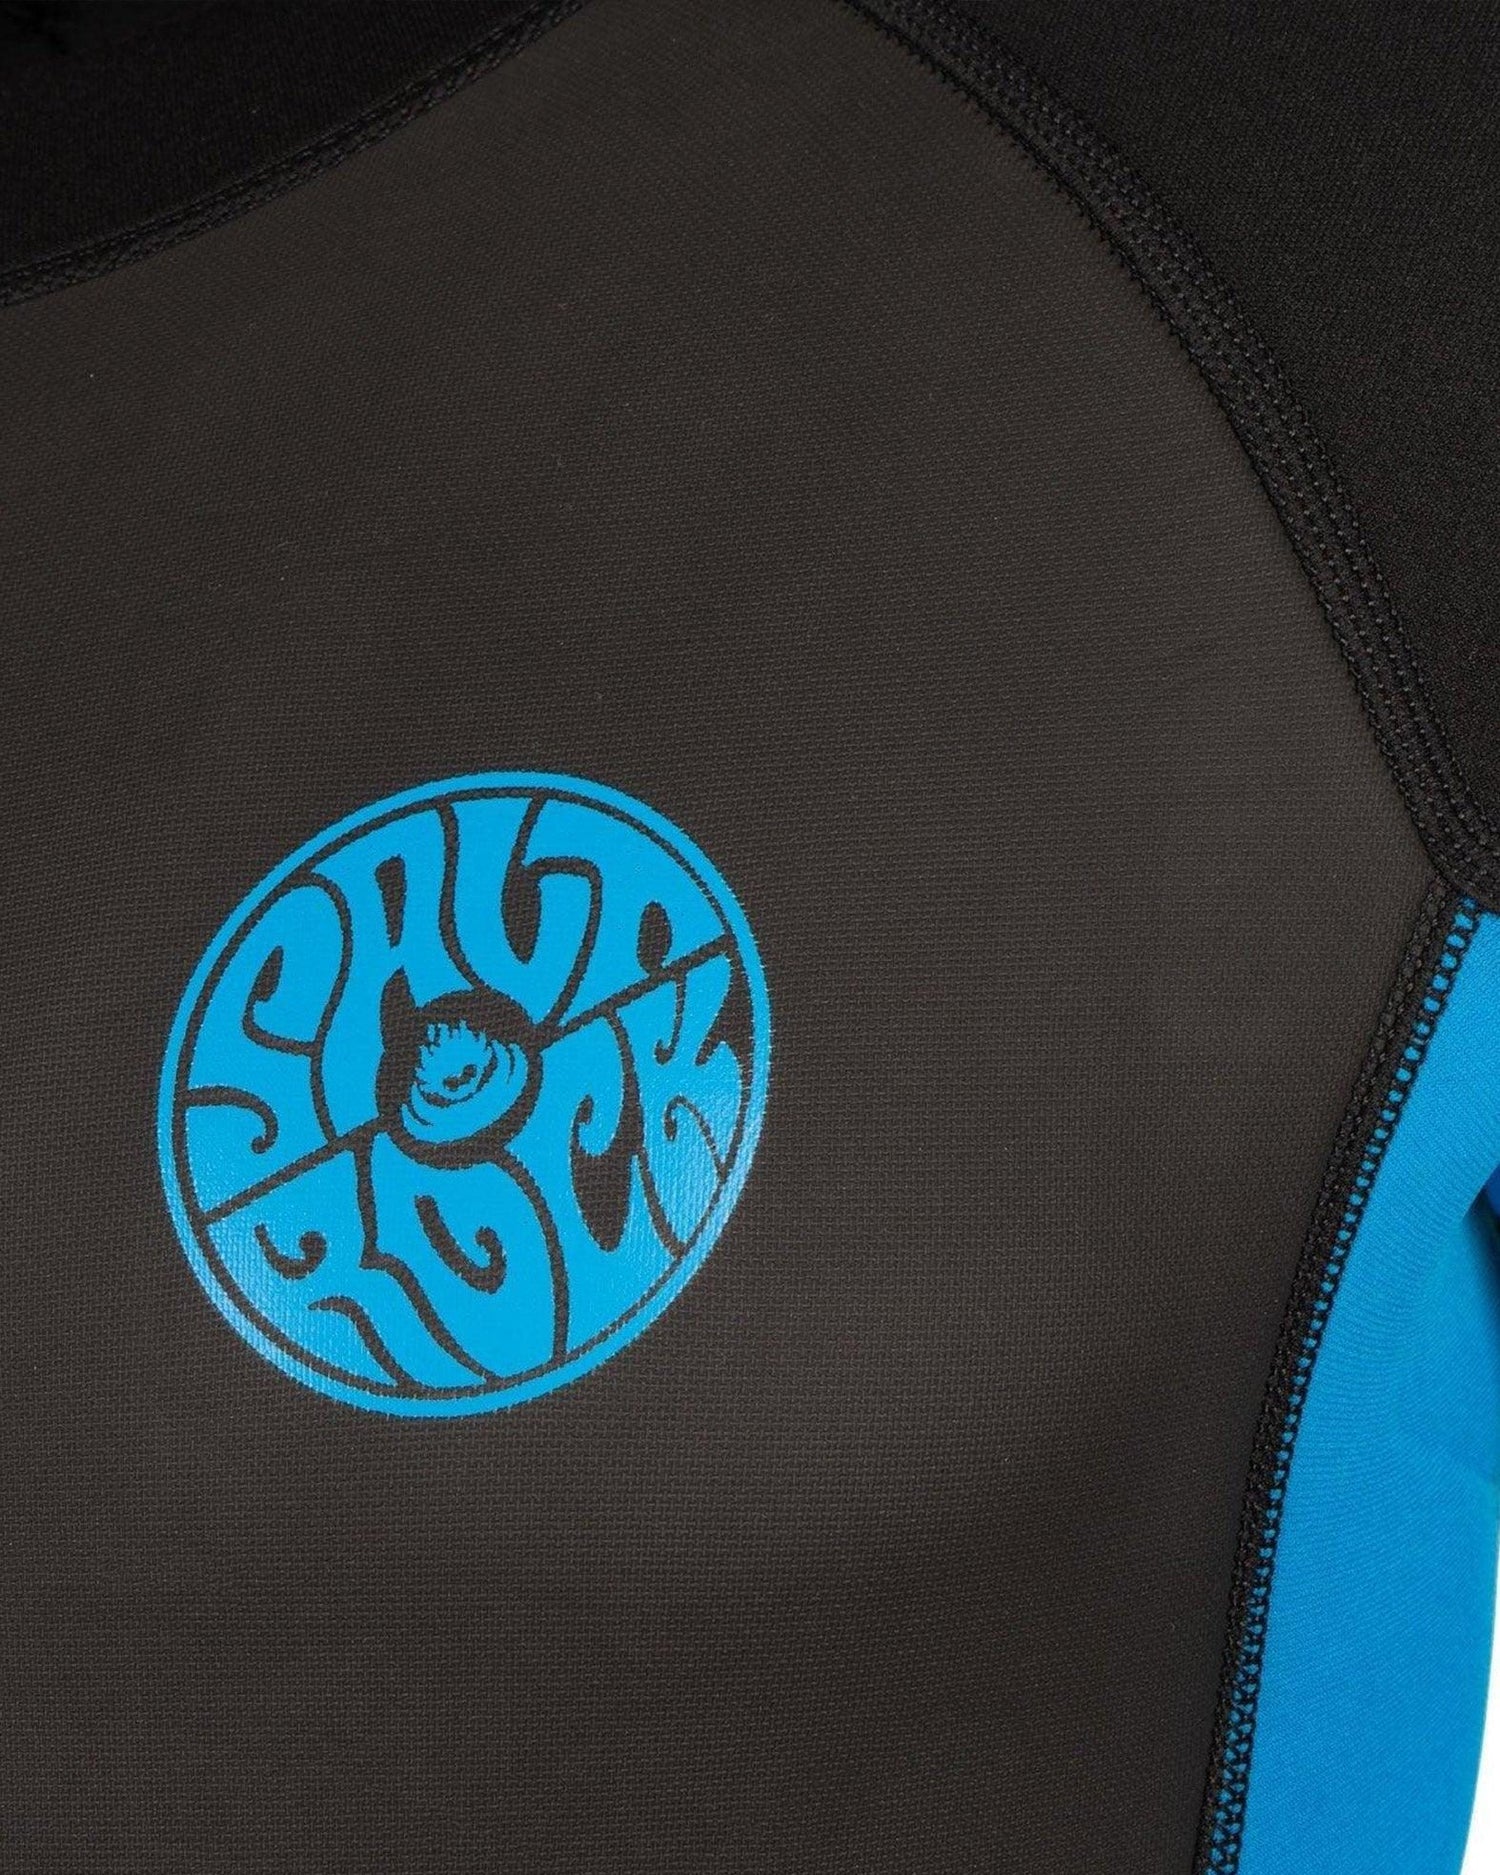 Close-up of a Saltrock Core - Men's 3/2 Shortie Wetsuit in black and blue neoprene with a circular blue logo featuring intricate swirl designs on the chest.